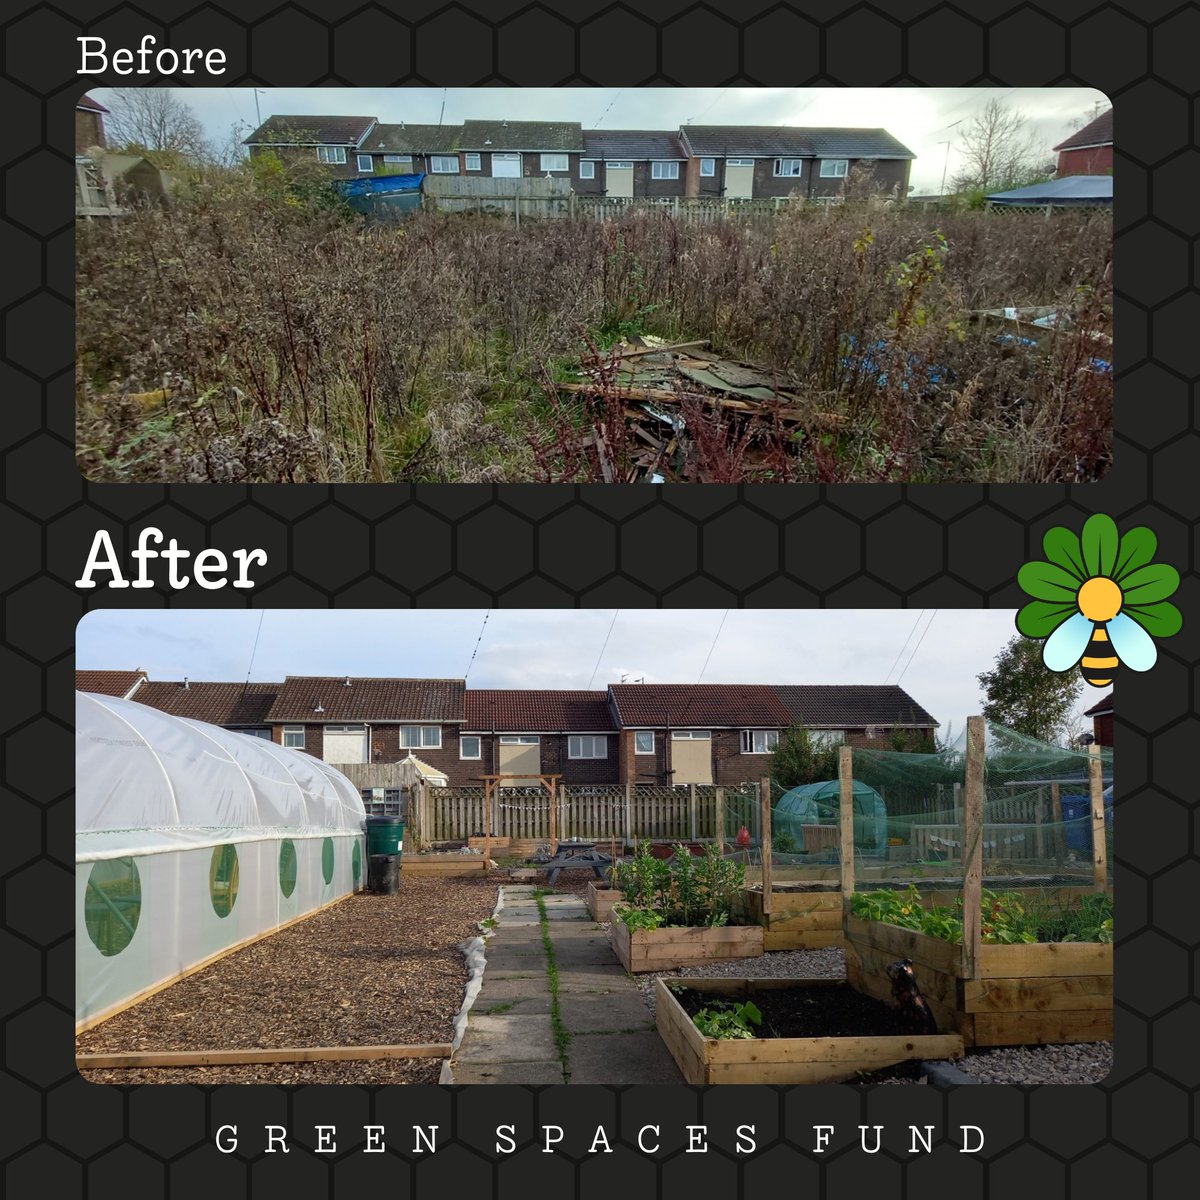 Amazing to see the incredible transformation at the Vitality Gardens project in @TamesideCouncil, which received funding from the Green Spaces Fund. The local community has taken it from a state of disuse to an accessible green space for everyone 💚 #GMGreenCity #GreenSpacesFund